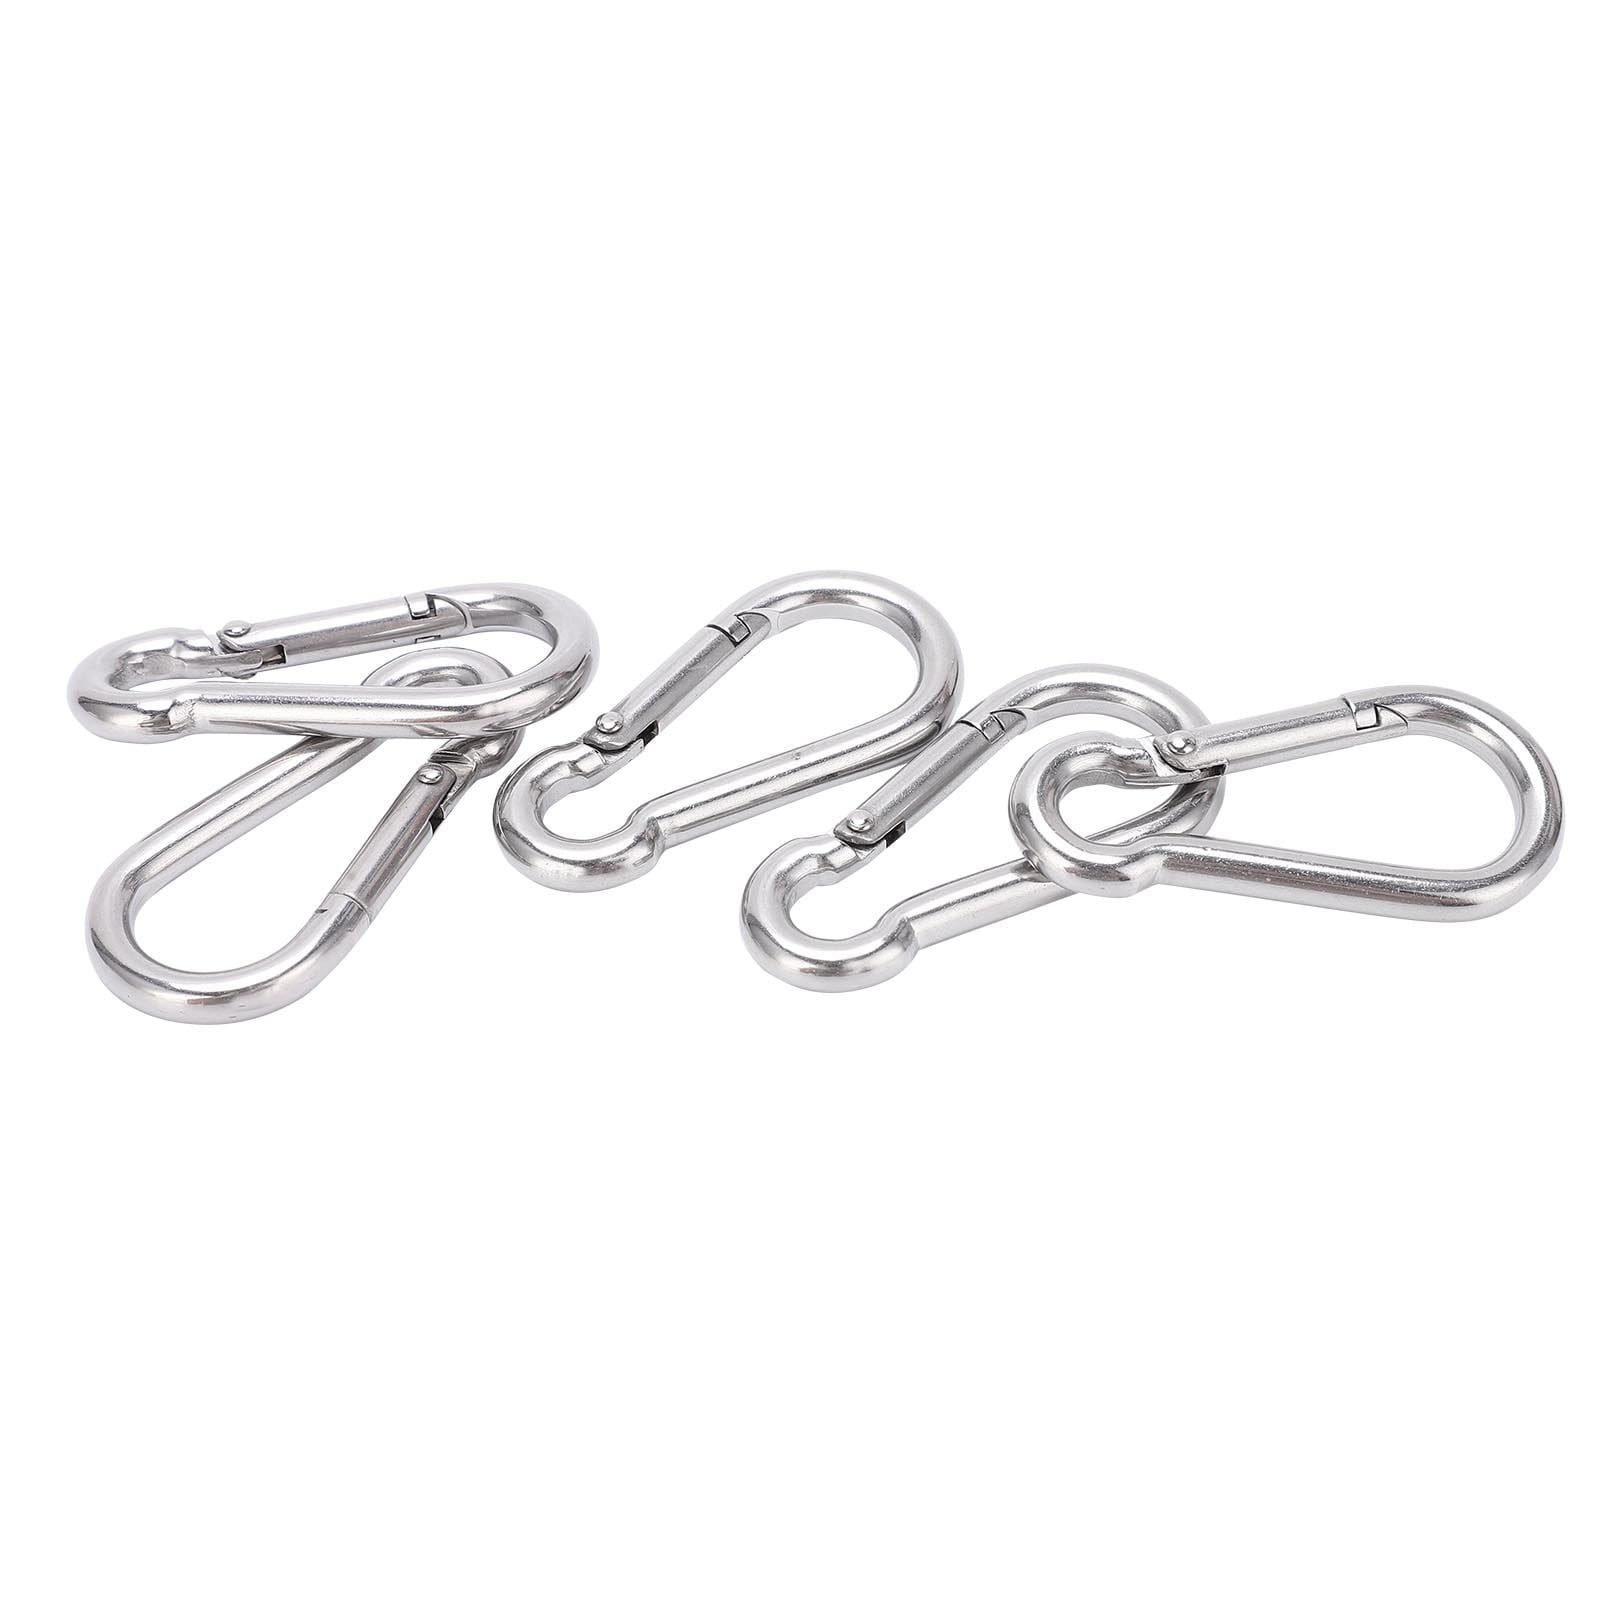 5pcs 50mm Small Carabiner Clip Stainless Steel Heavy Duty Spring Snap Hook Parts 